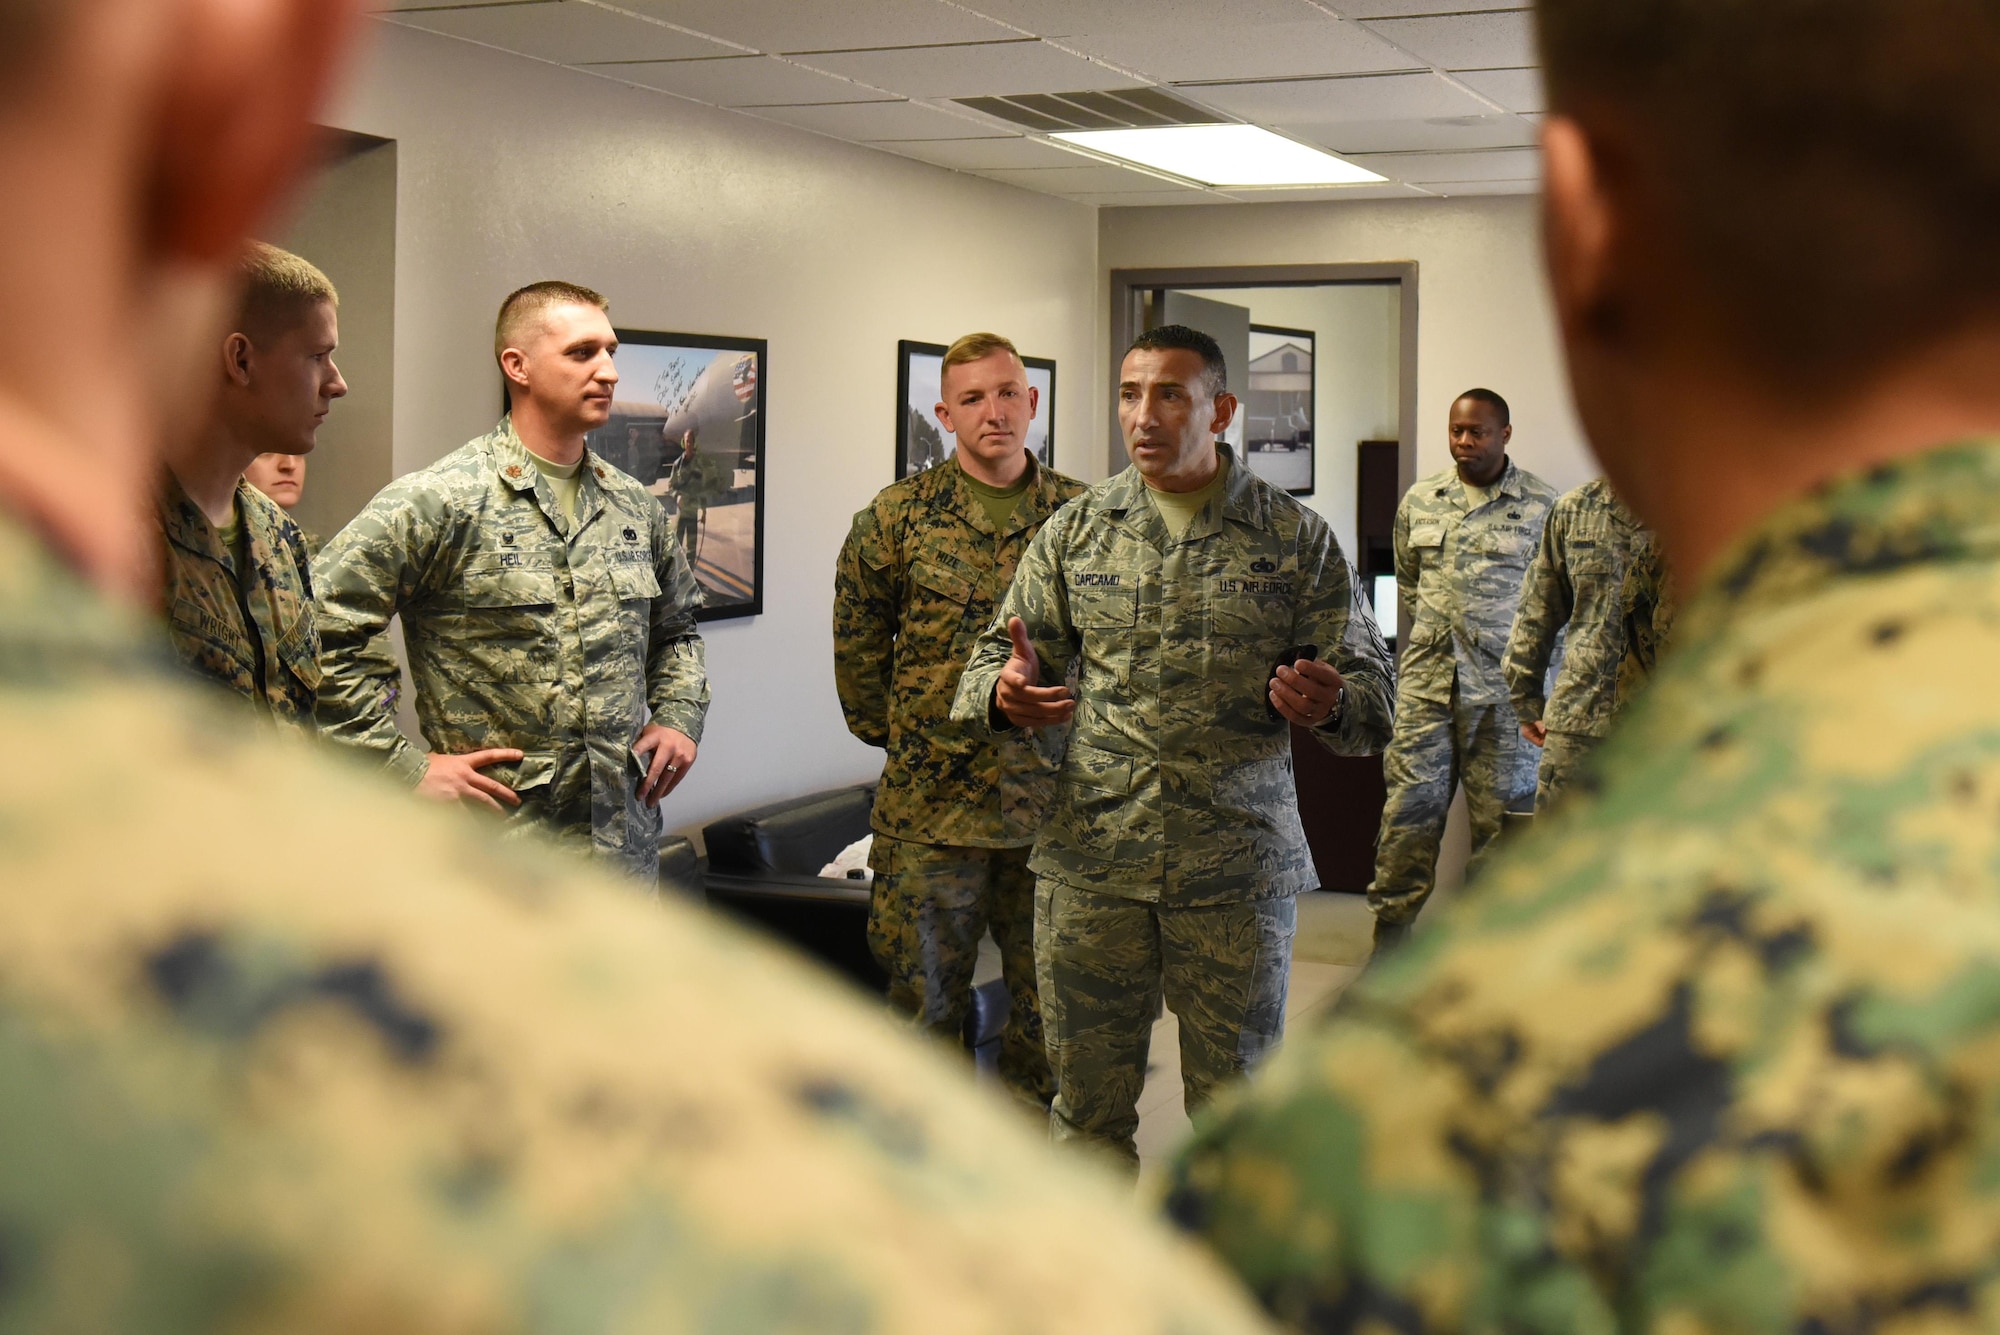 Chief Master Sgt. Marlon Carcamo, 4th Logistics Readiness Squadron chief enlisted manager, talks to Marines and Airmen Nov. 17, 2016 Seymour Johnson Air Force Base, North Carolina. Airmen trained Marines in a week-long joint training exercise to familiarize the Marines with the R-11 aircraft refueler before their deployment to Morón Air Base, Spain. (U.S. Air Force photo by Airman 1st Class Kenneth Boyton)